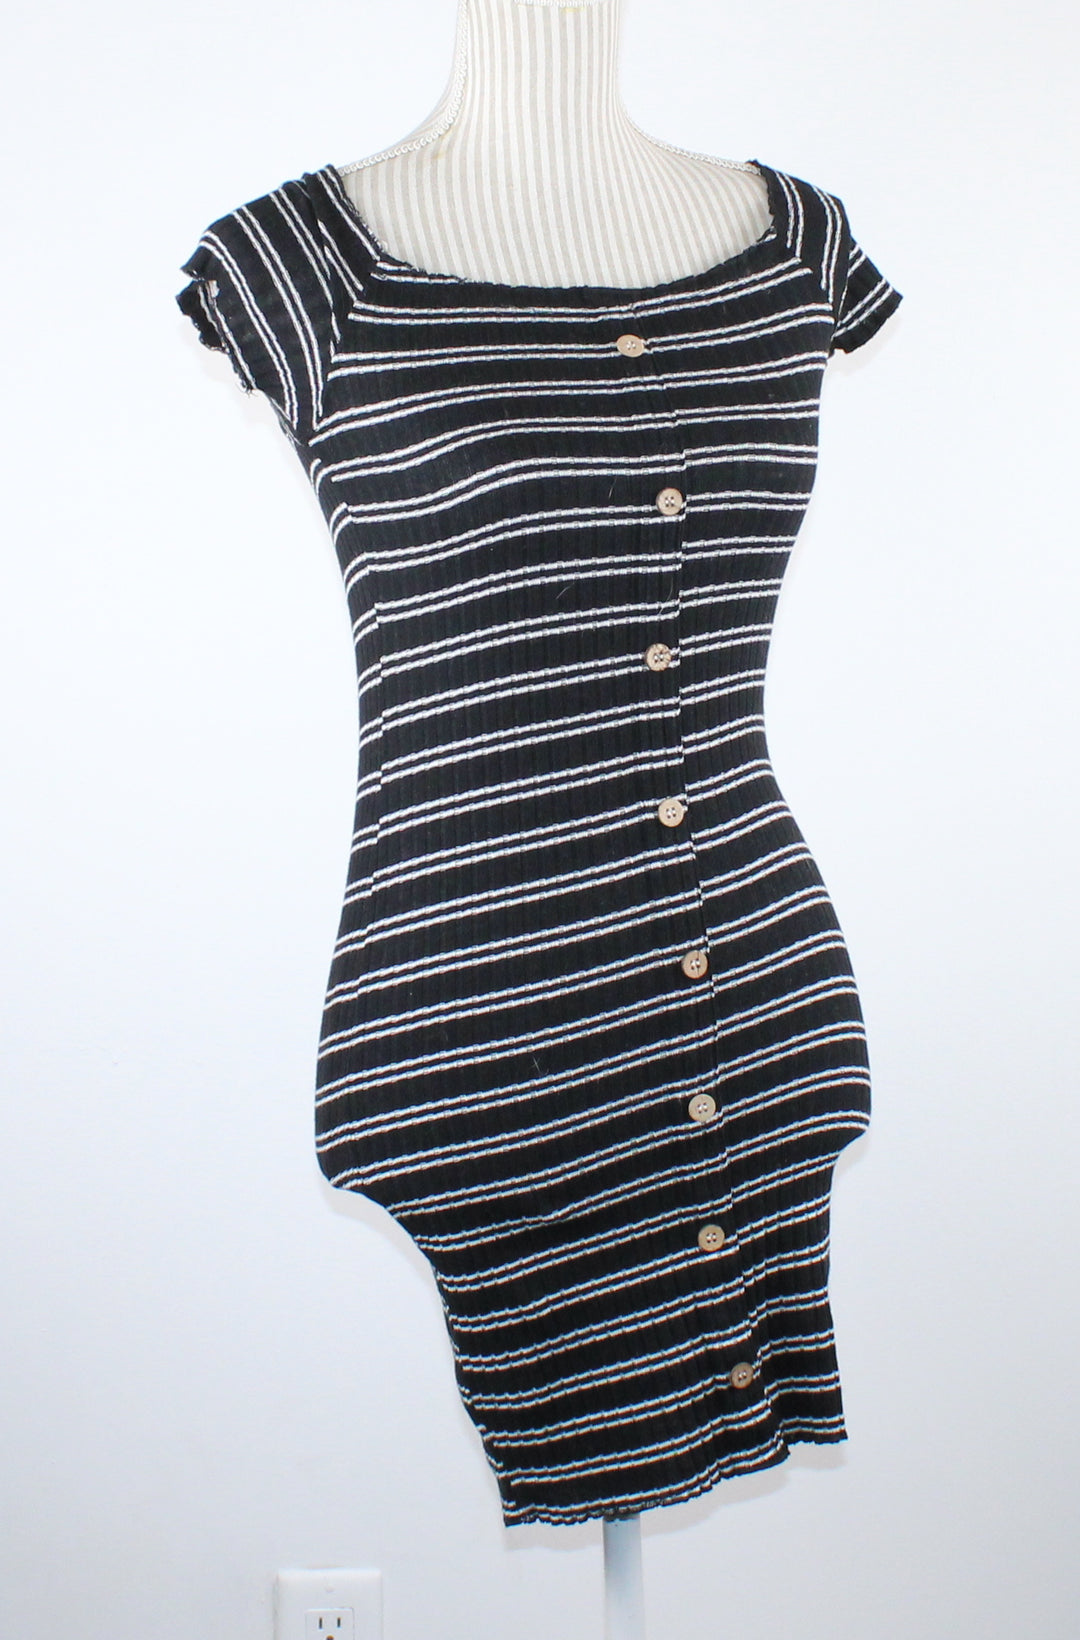 STREETWEAR SOCIETY RIBBED STRIPED DRESS LADIES SMALL NWOT!